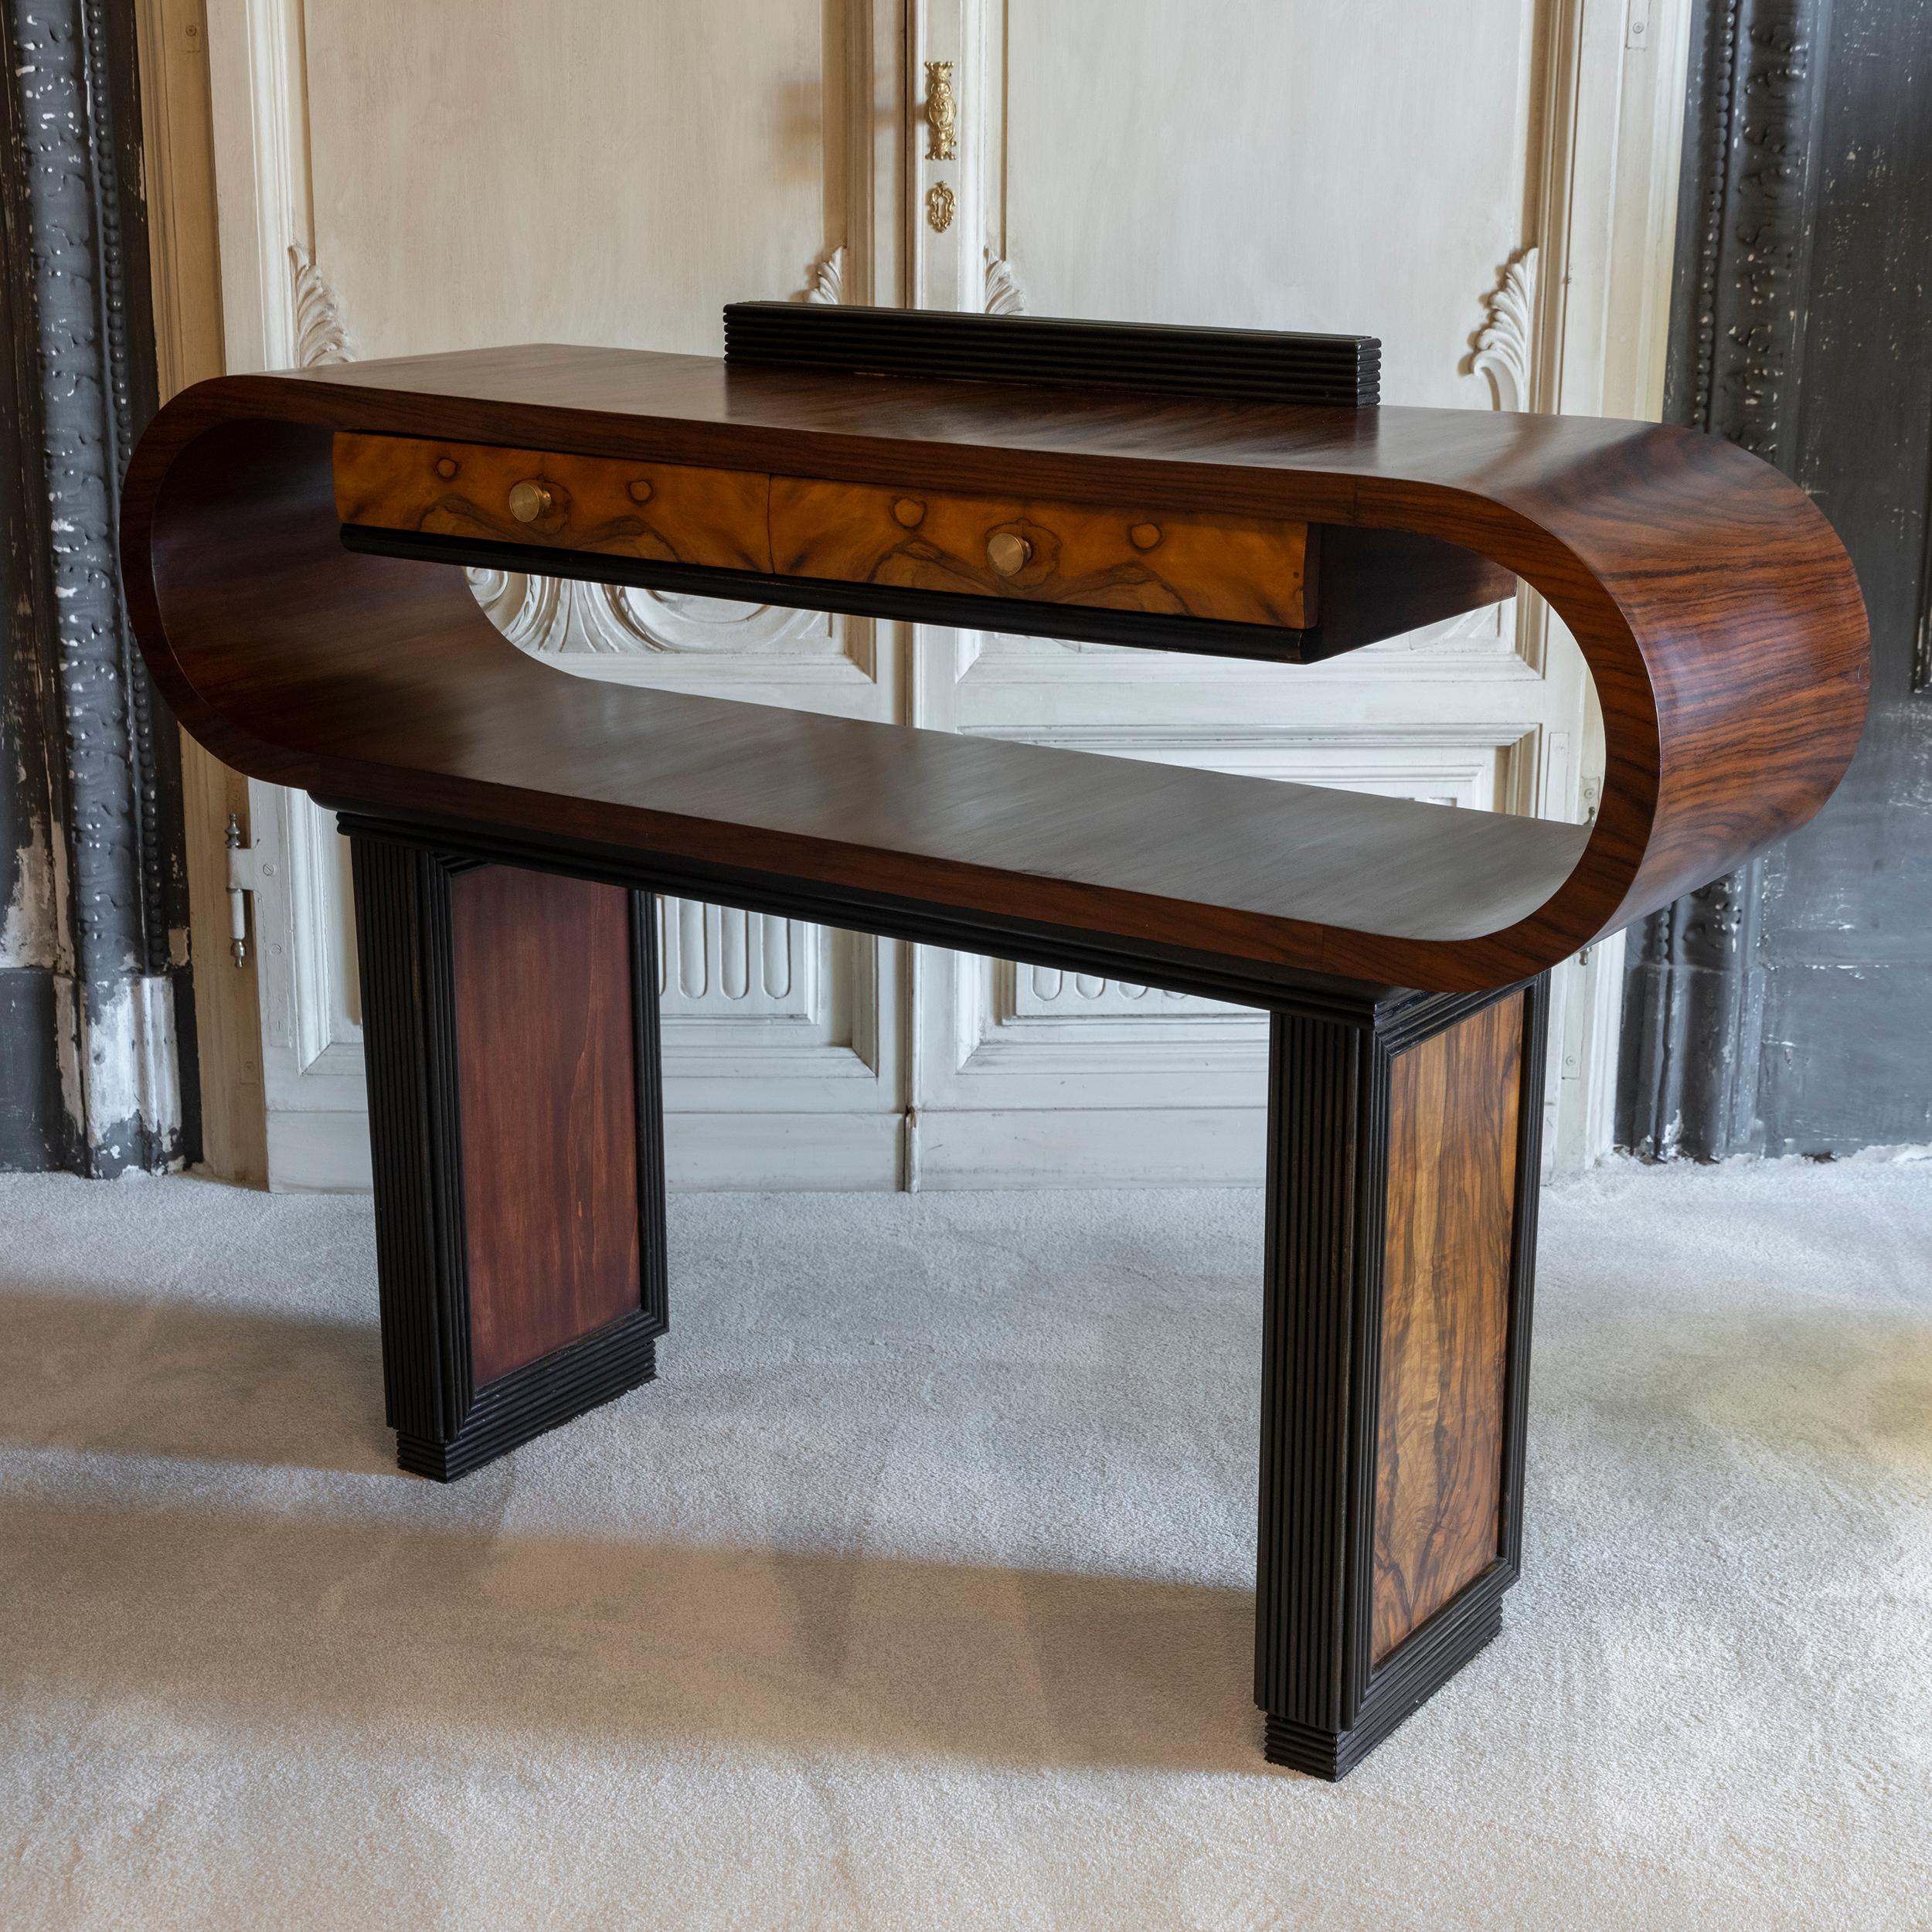 1930s Italian Deco Console Table with Drawers Palisander, Mahogany and Walnut For Sale 4